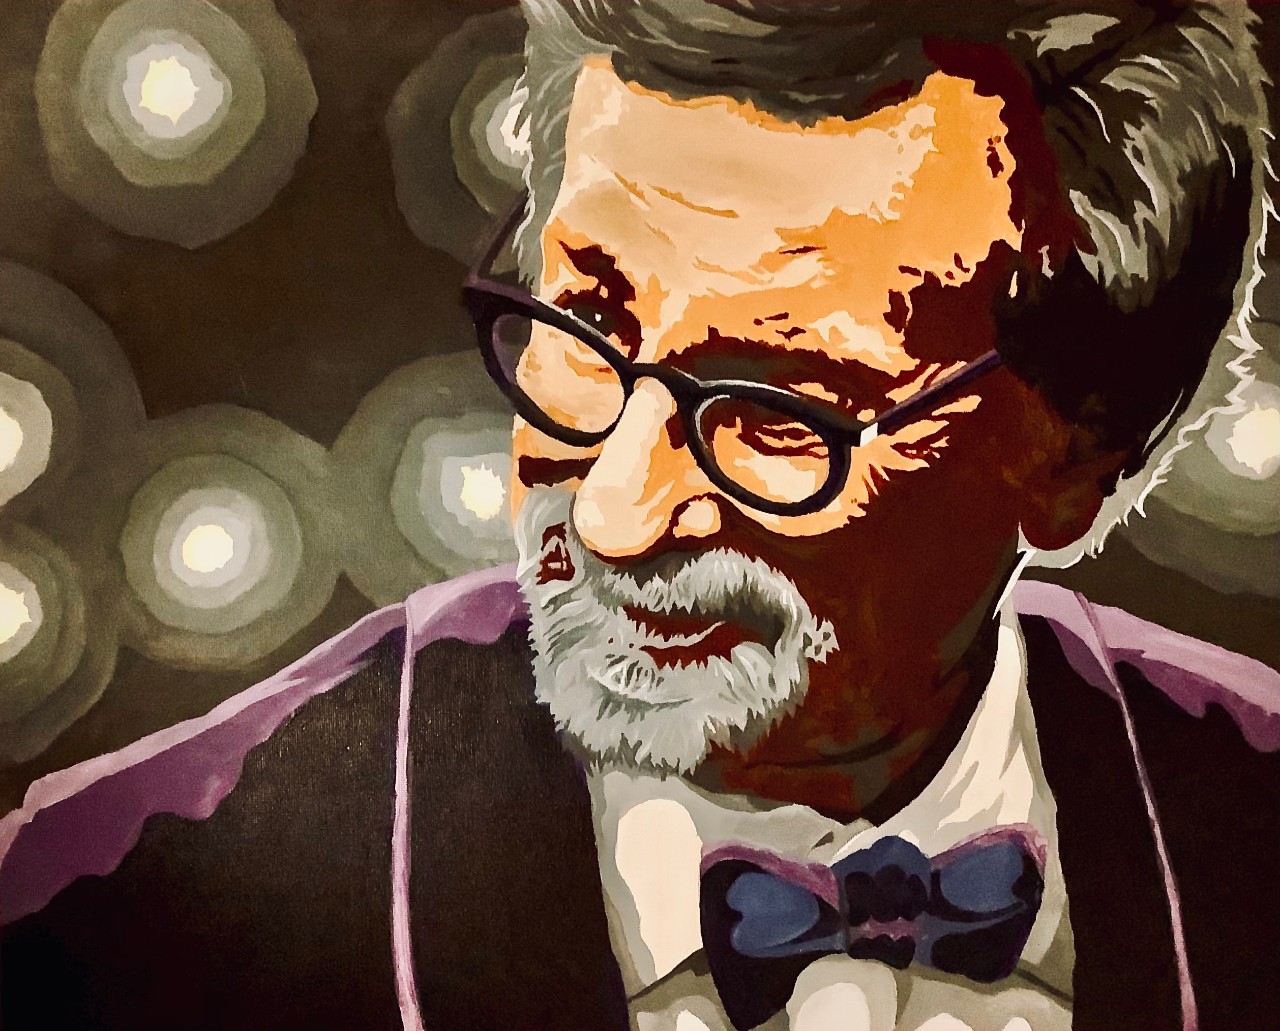 Artwork showing the face of film director Stephen Spielberg. He is shown with his head tiled to the side, looking off to the side. He has short black and gray hair, a gray goatee, black glasses and a purple blazer and bowtie.